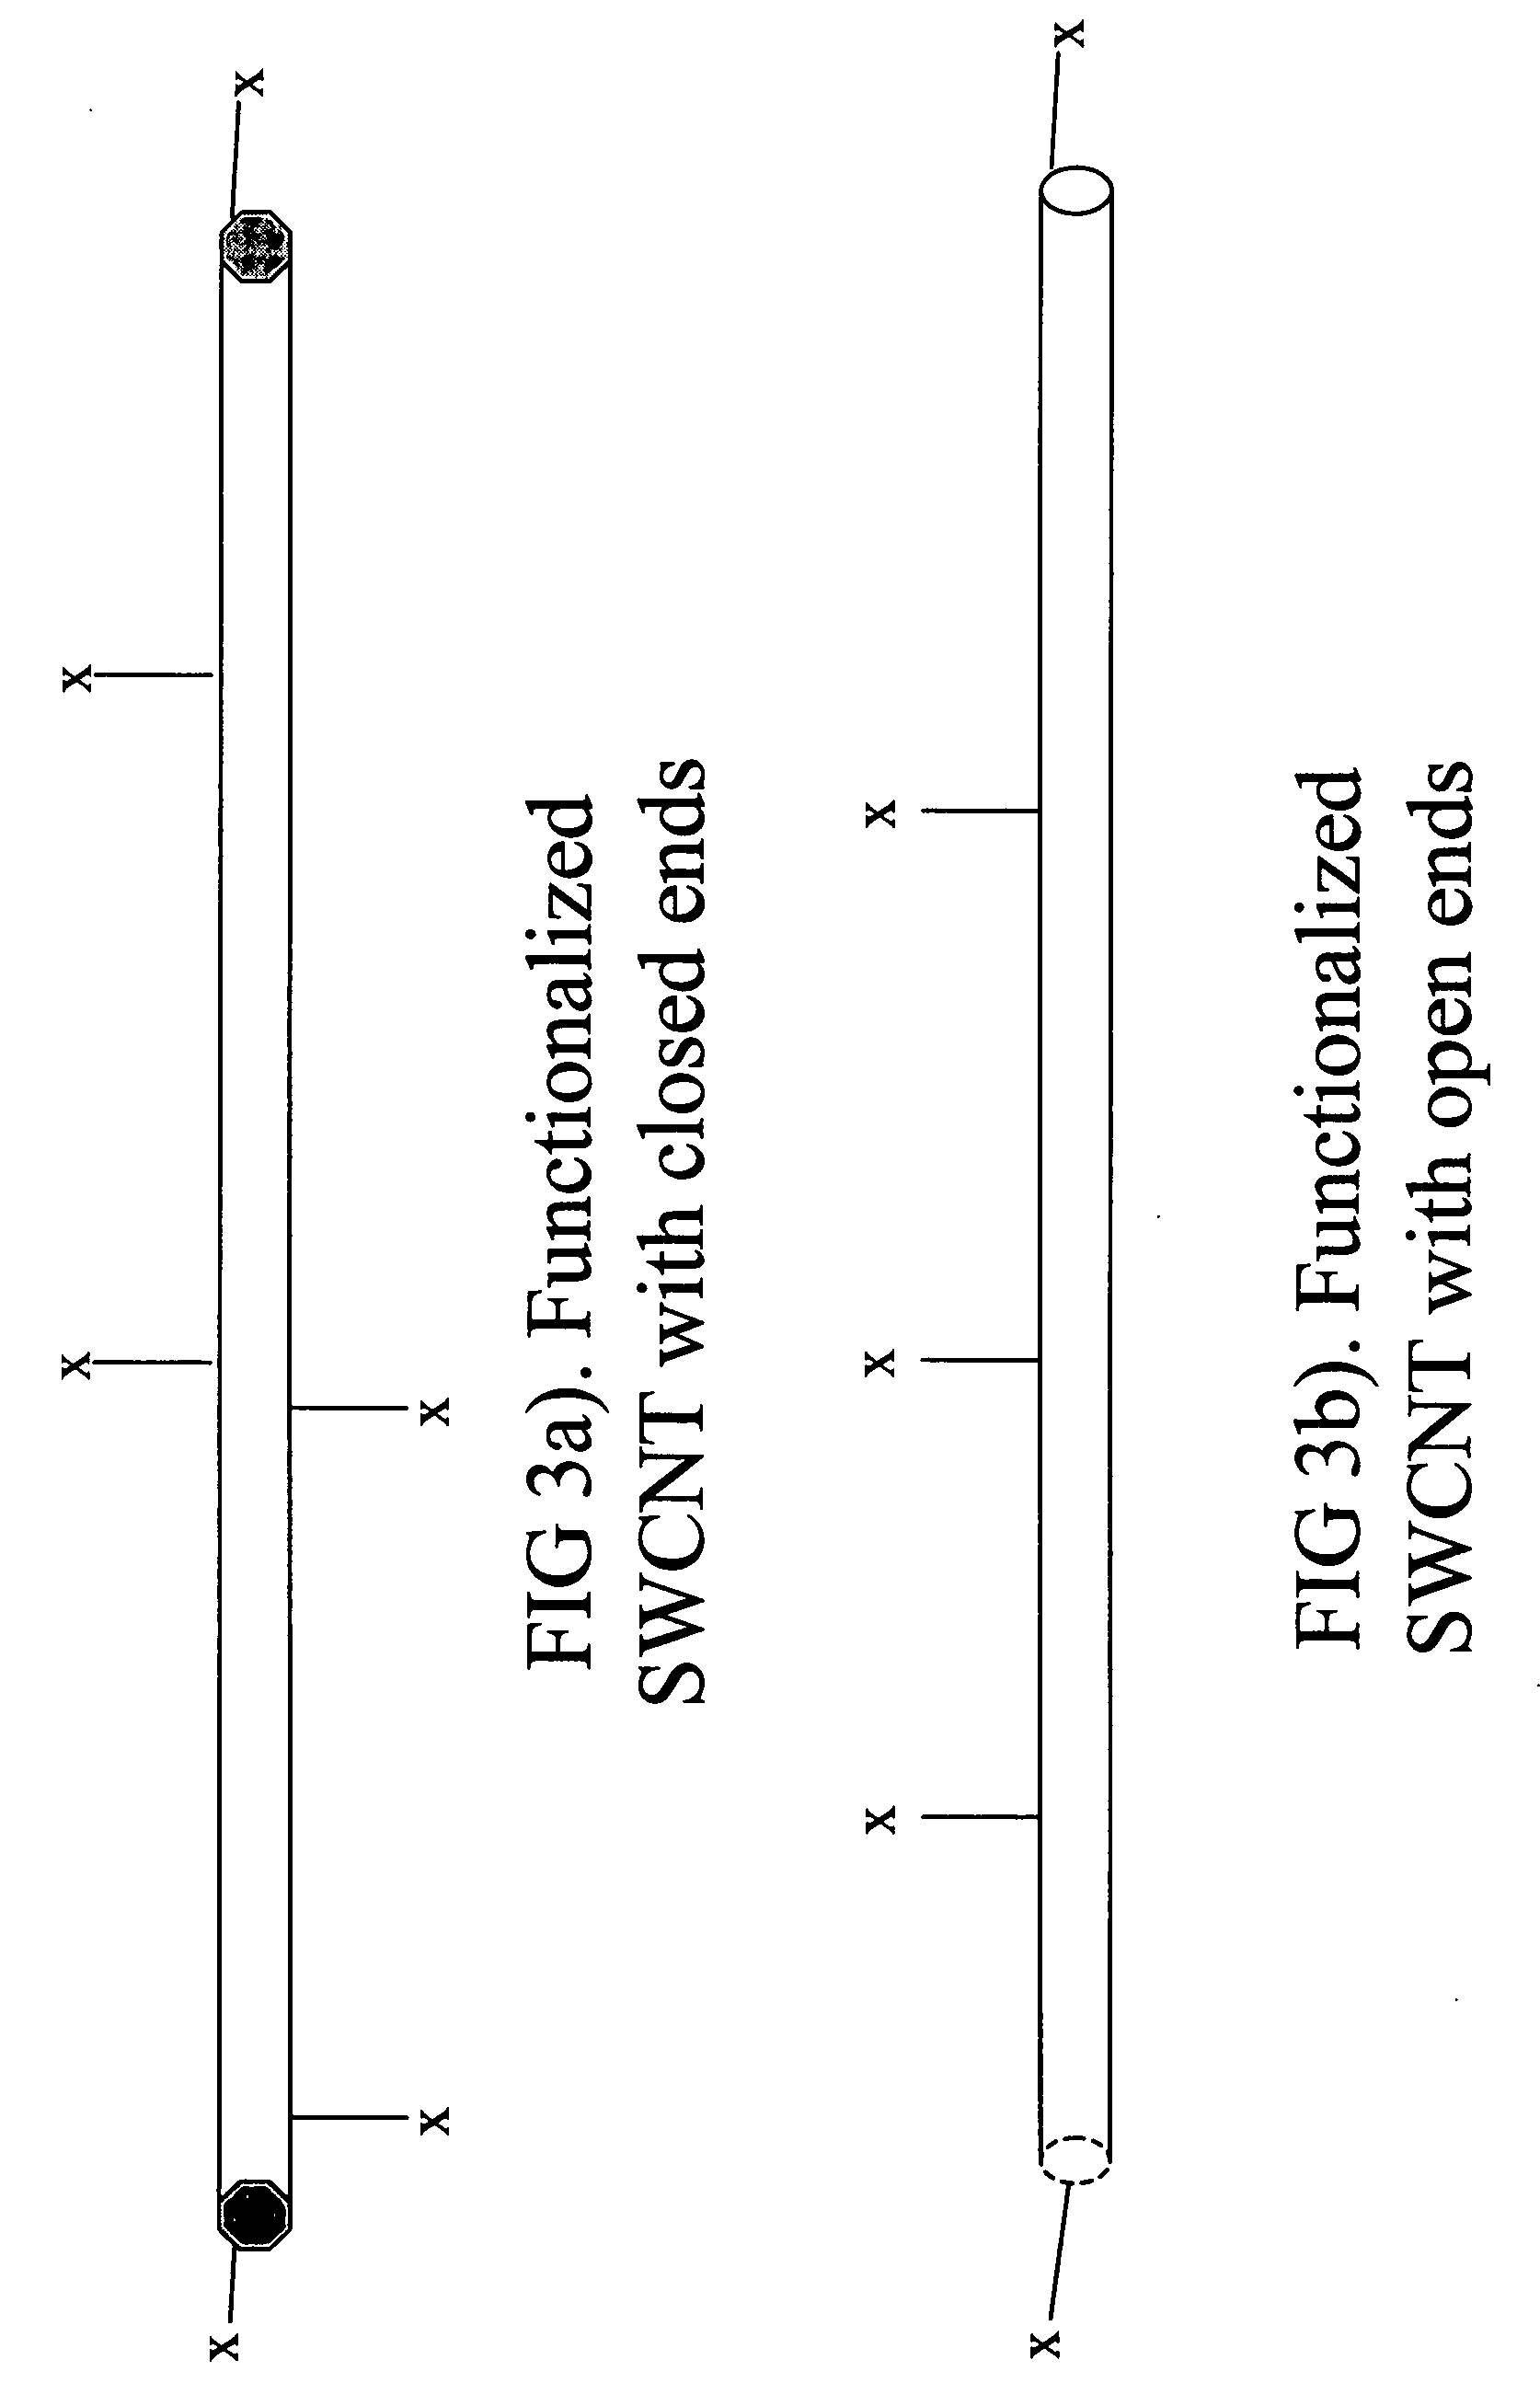 Multi-layer conductor with carbon nanotubes